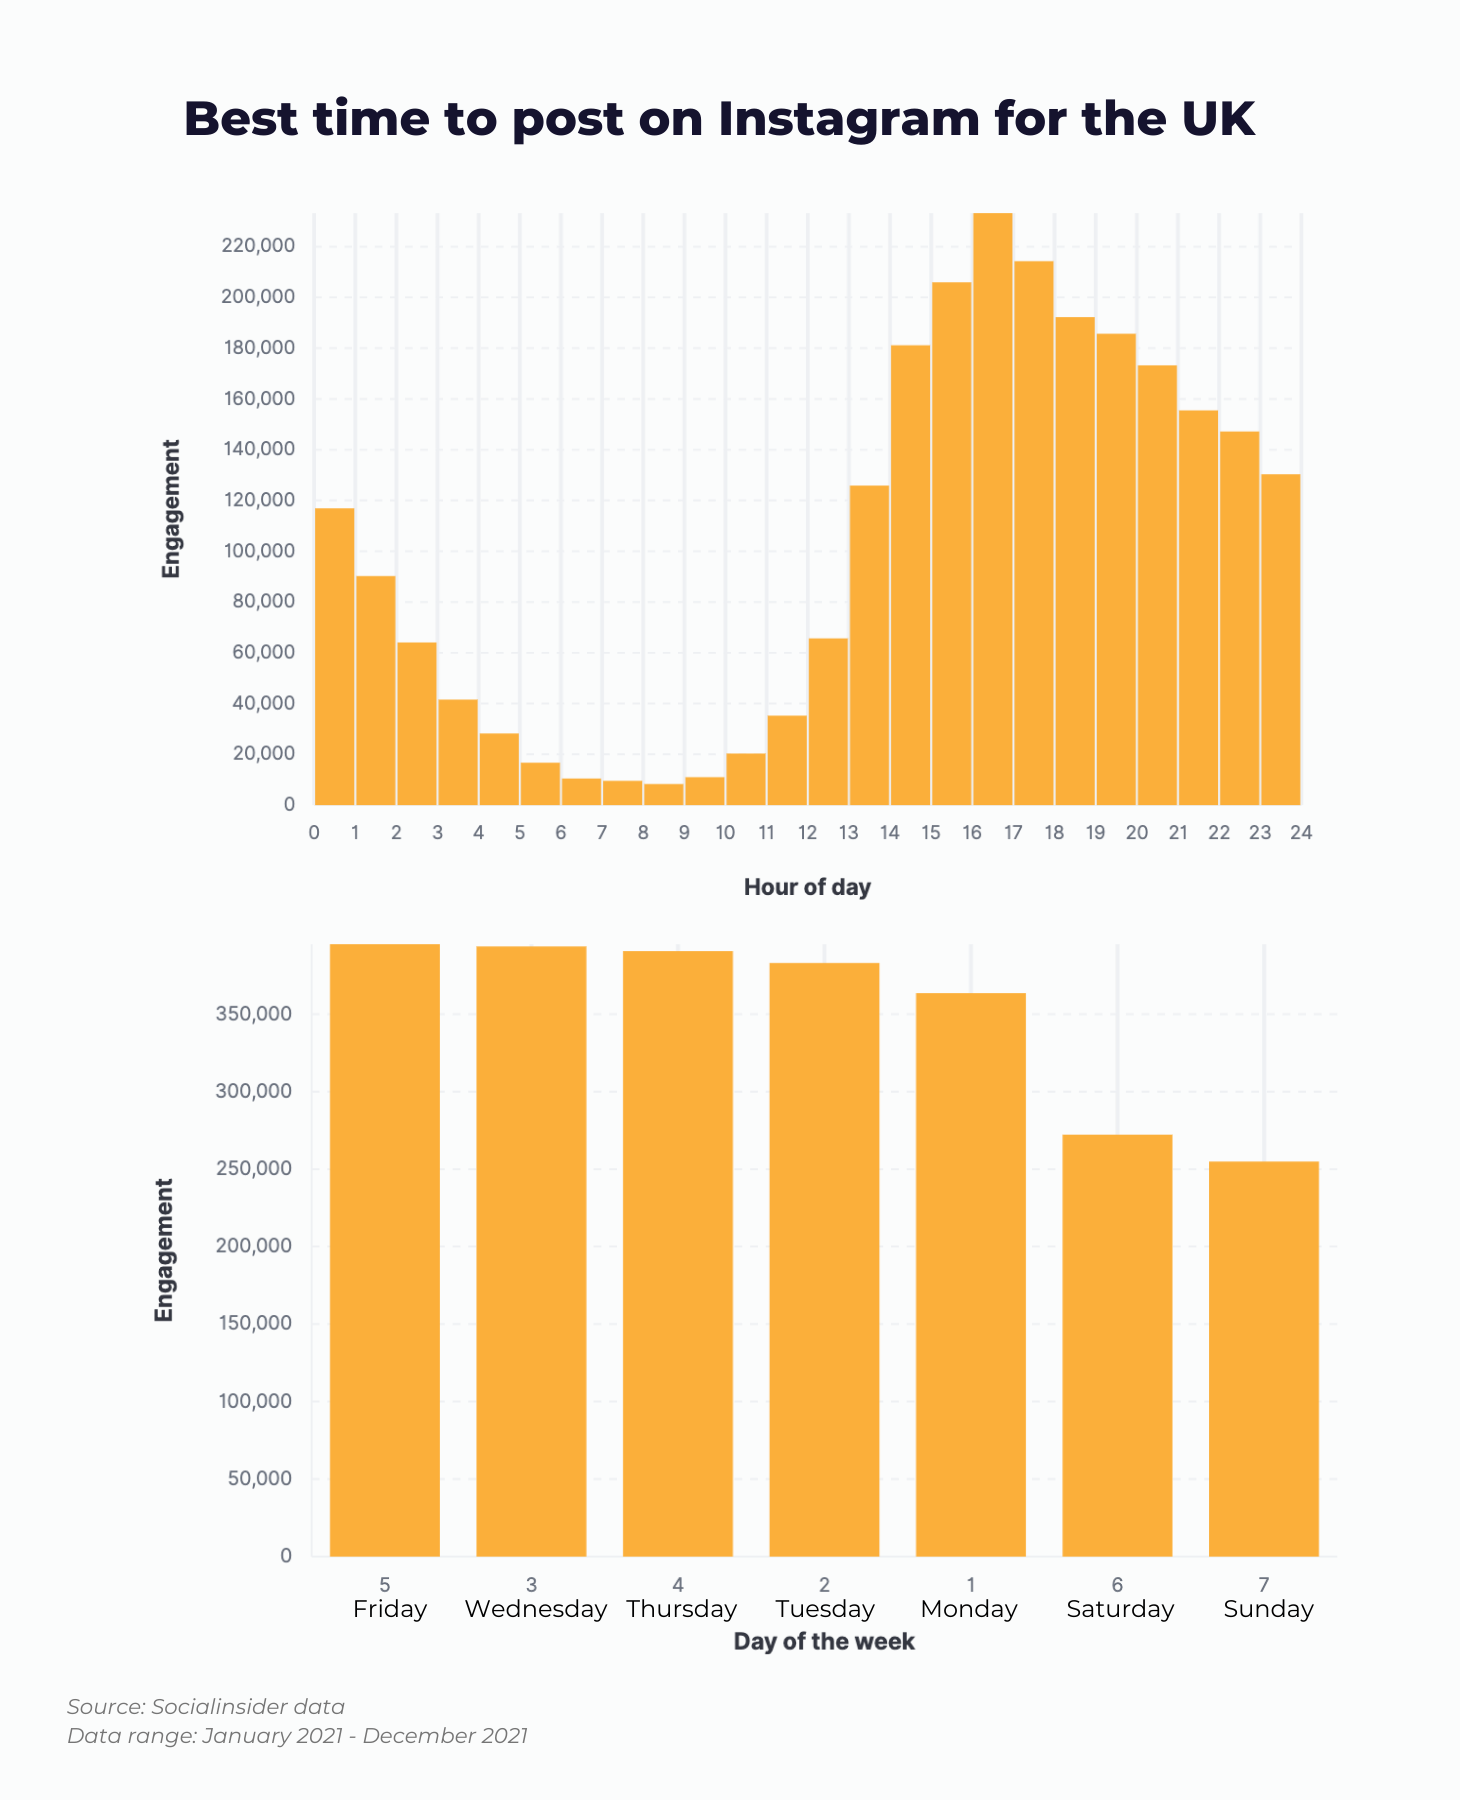 Here is a chart showing what data tells about the best time to post on Instagram for the UK.